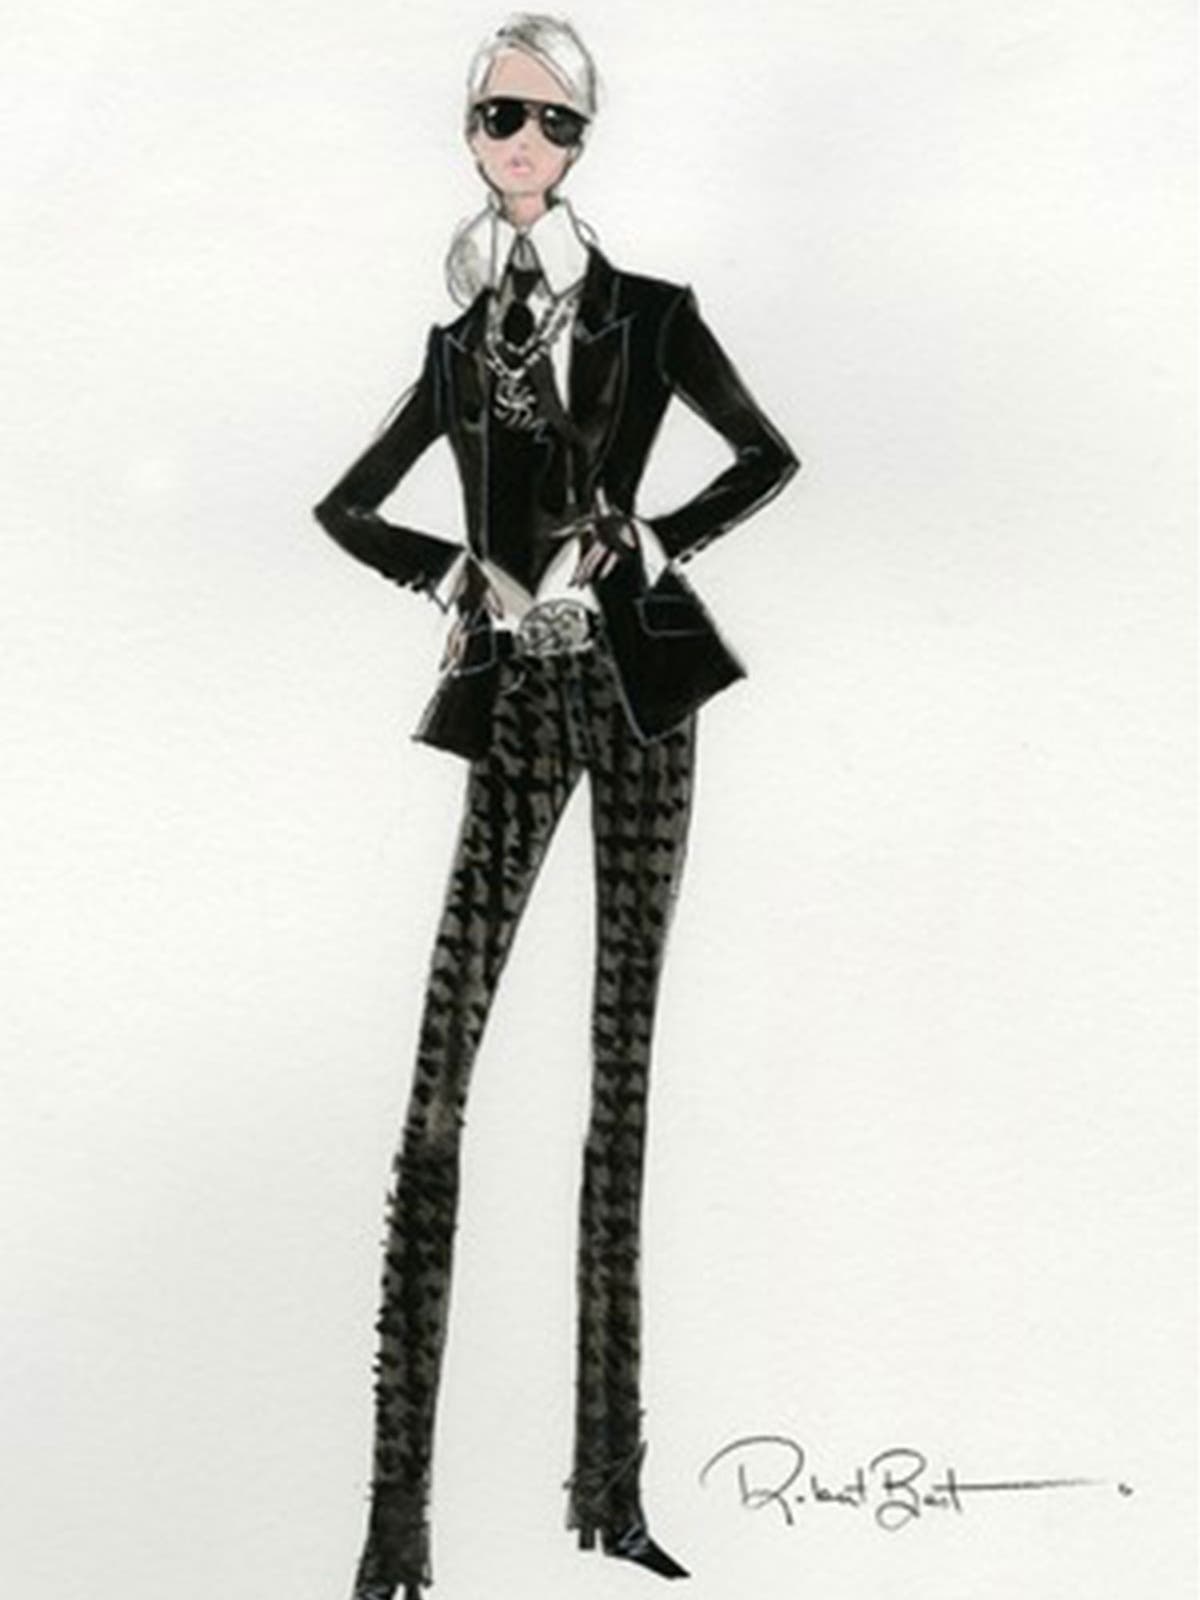 Barbie Lagerfeld: Fashion designer Karl is to be made into a doll | The ...